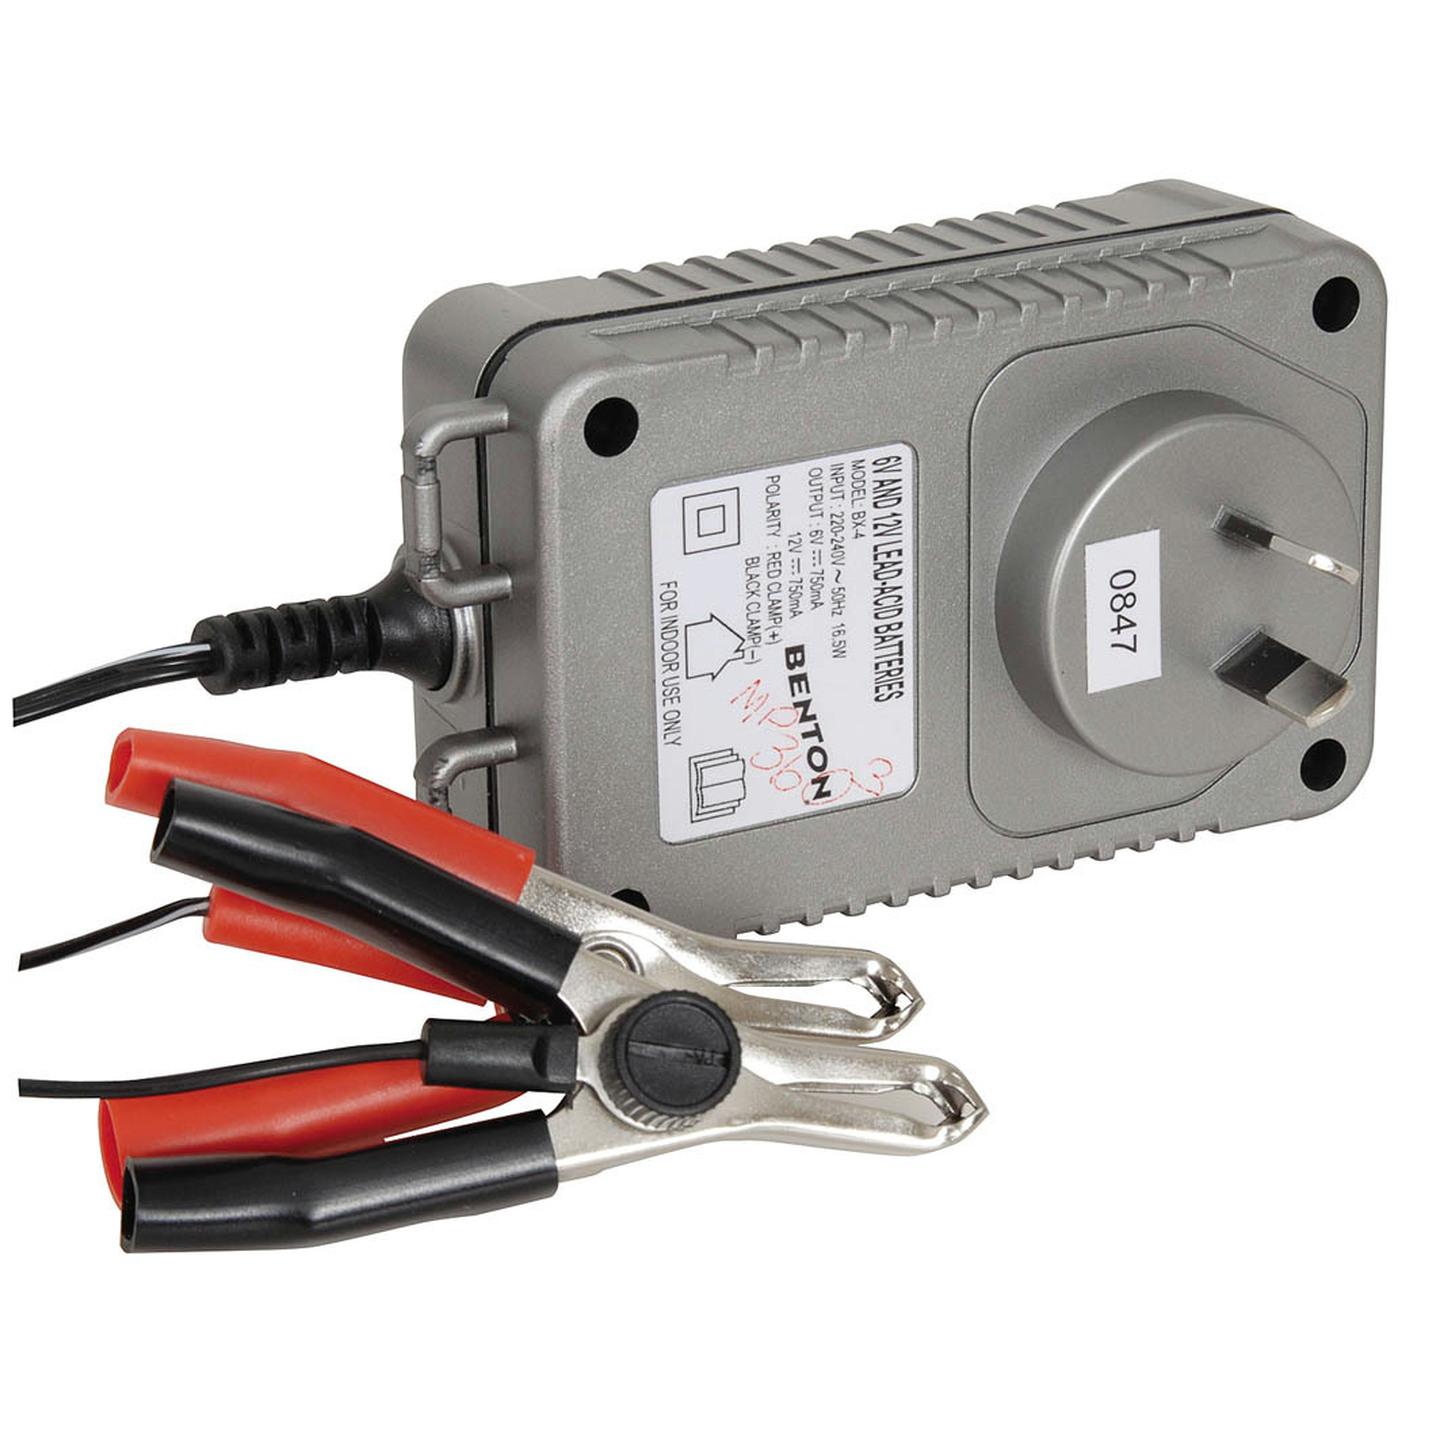 3-Stage 6/12V Automatic Battery Charger